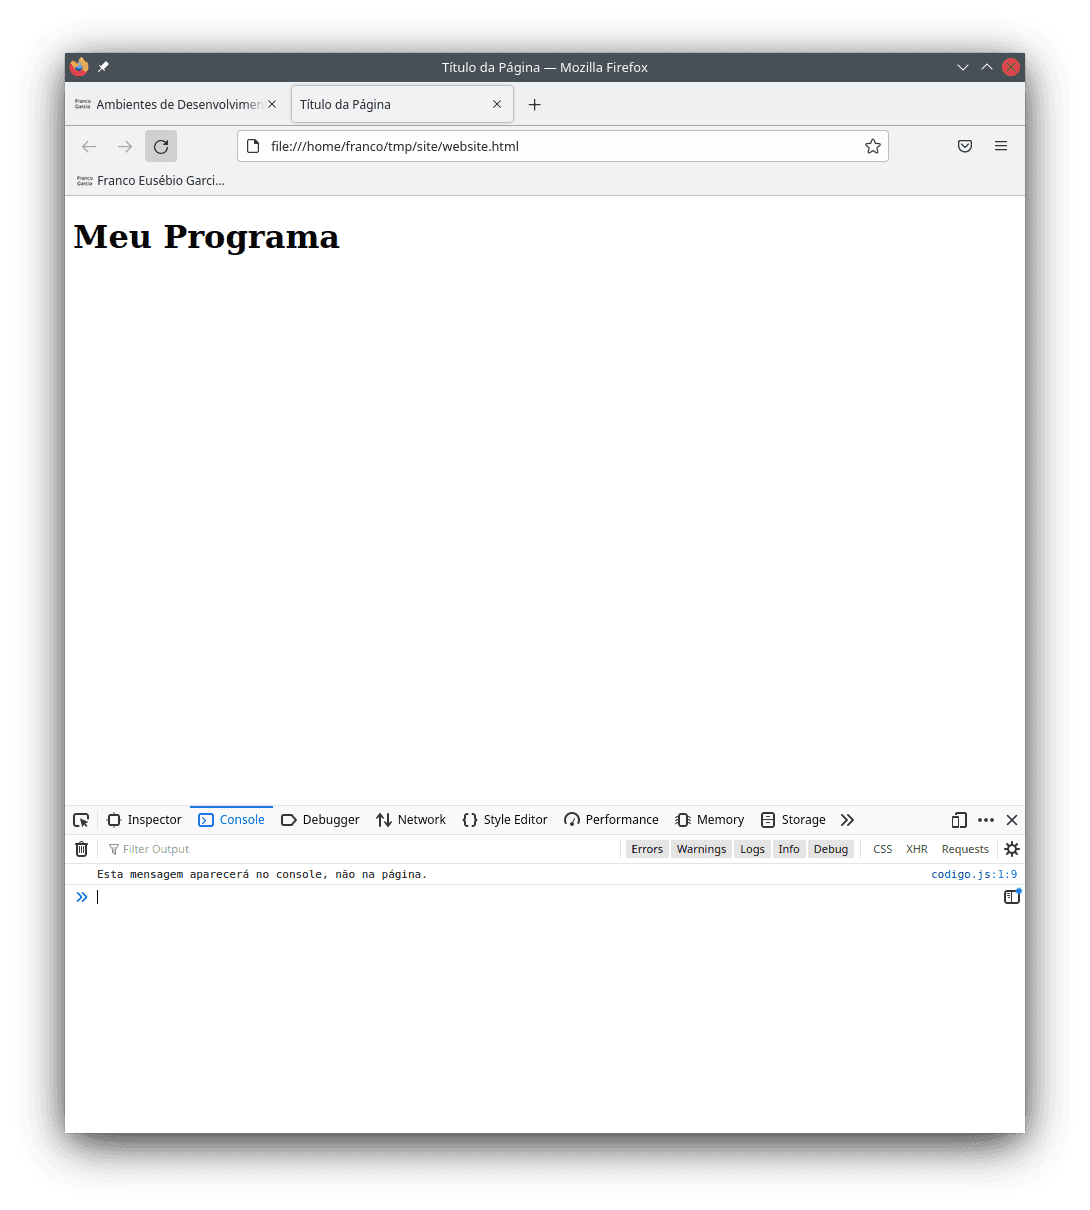 The Portuguese version of page as presented by Firefox. The text from `console.log()` appears on the terminal, not on the page, as suggested by the name of the method.